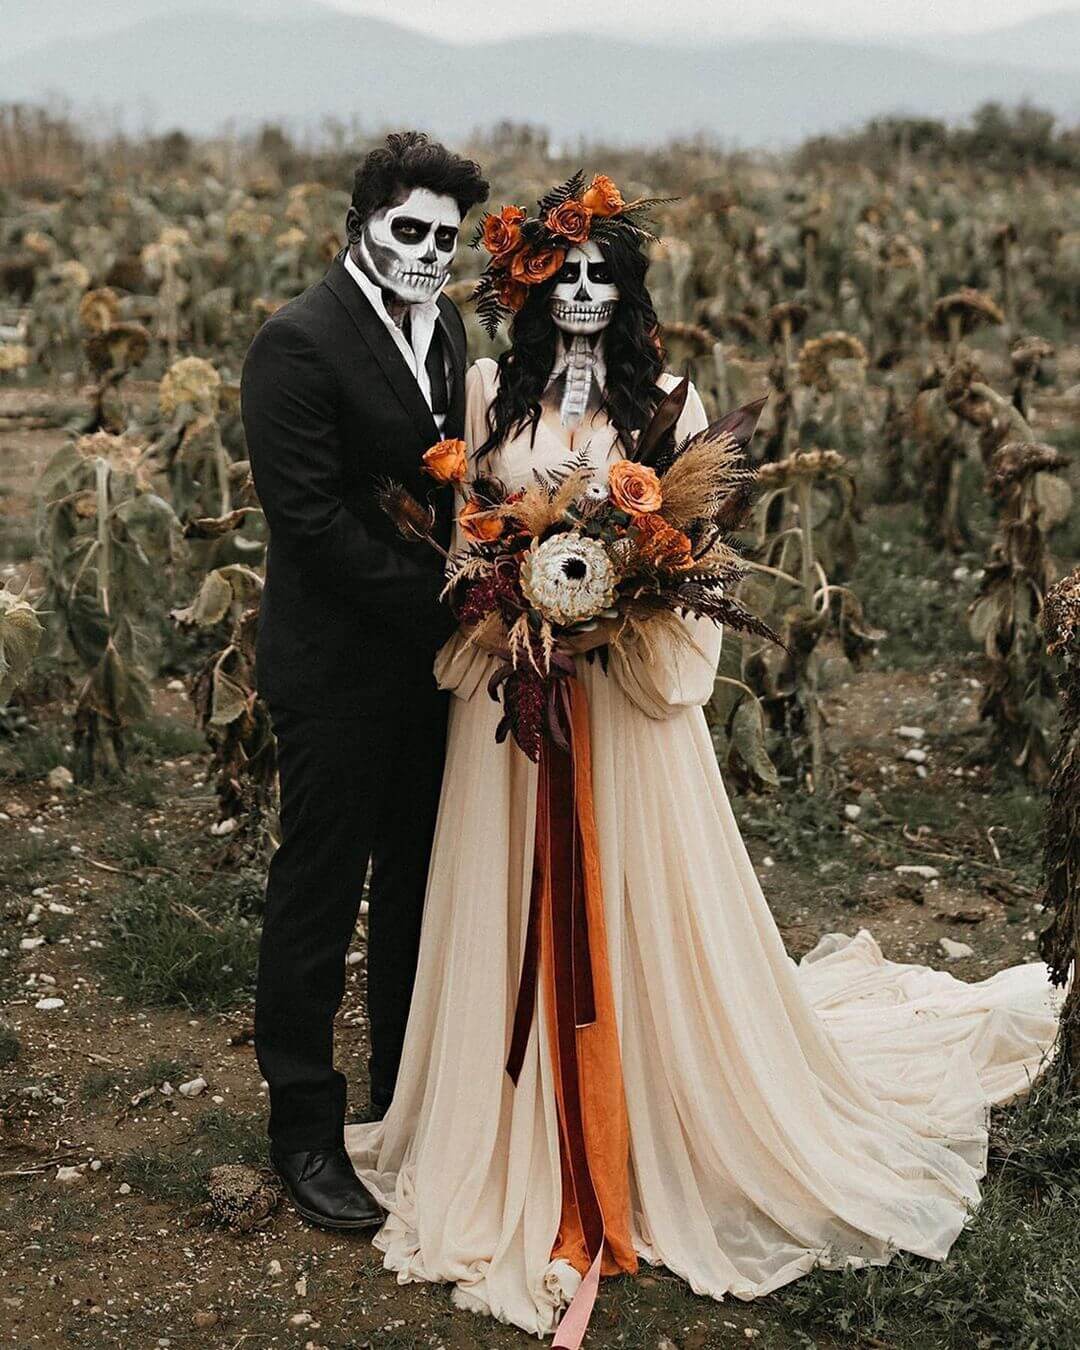 Spooky Floral Bride Couple Halloween Costumes